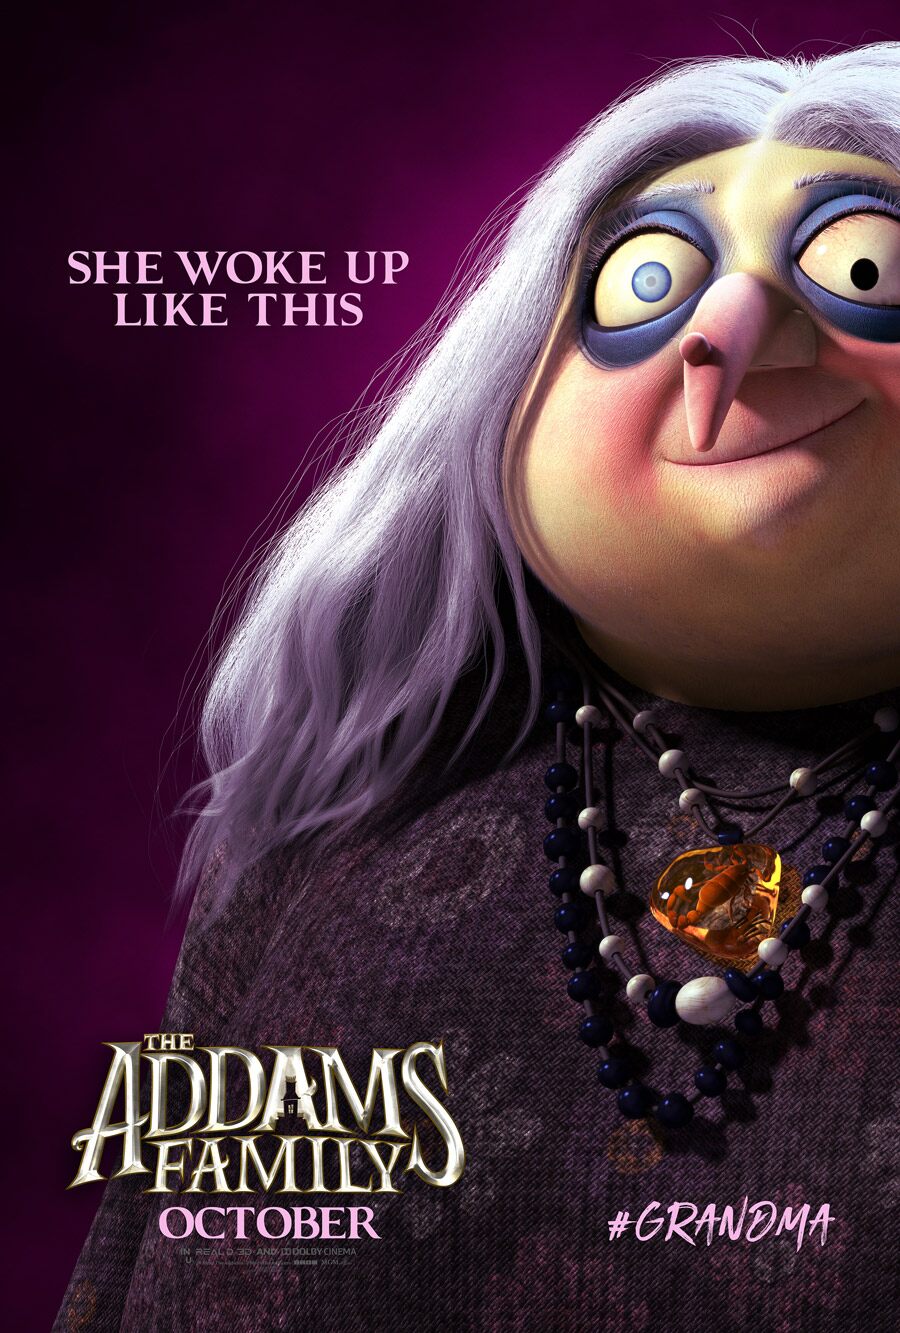 The Addams Family character posters introduce the creepy, kooky clan